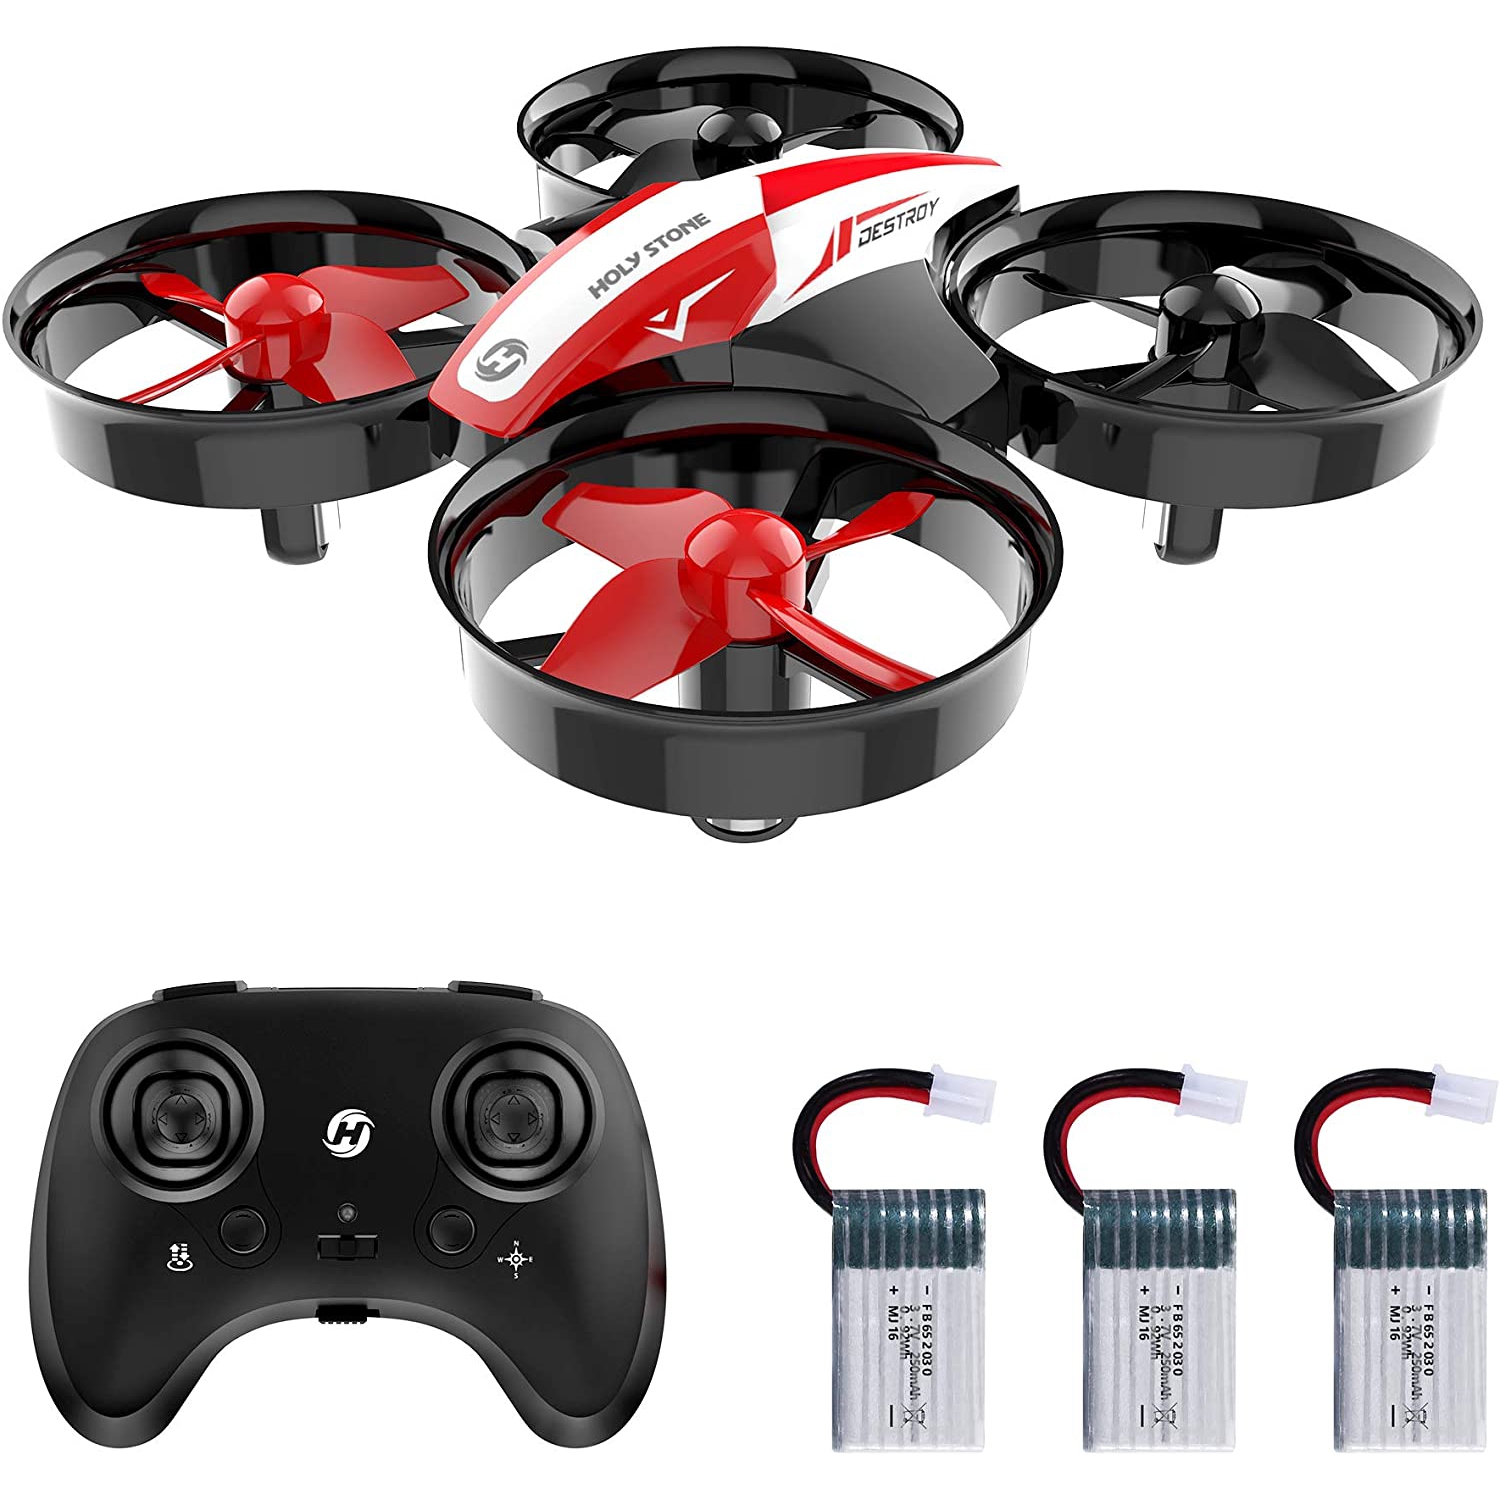 Mini Drone RC Nano Quadcopter Best Drone for Kids and Beginners RC Helicopter Plane with Auto Hovering, 3D Flip, Headless Mode and Extra Batteries Toys for Boys and Girl